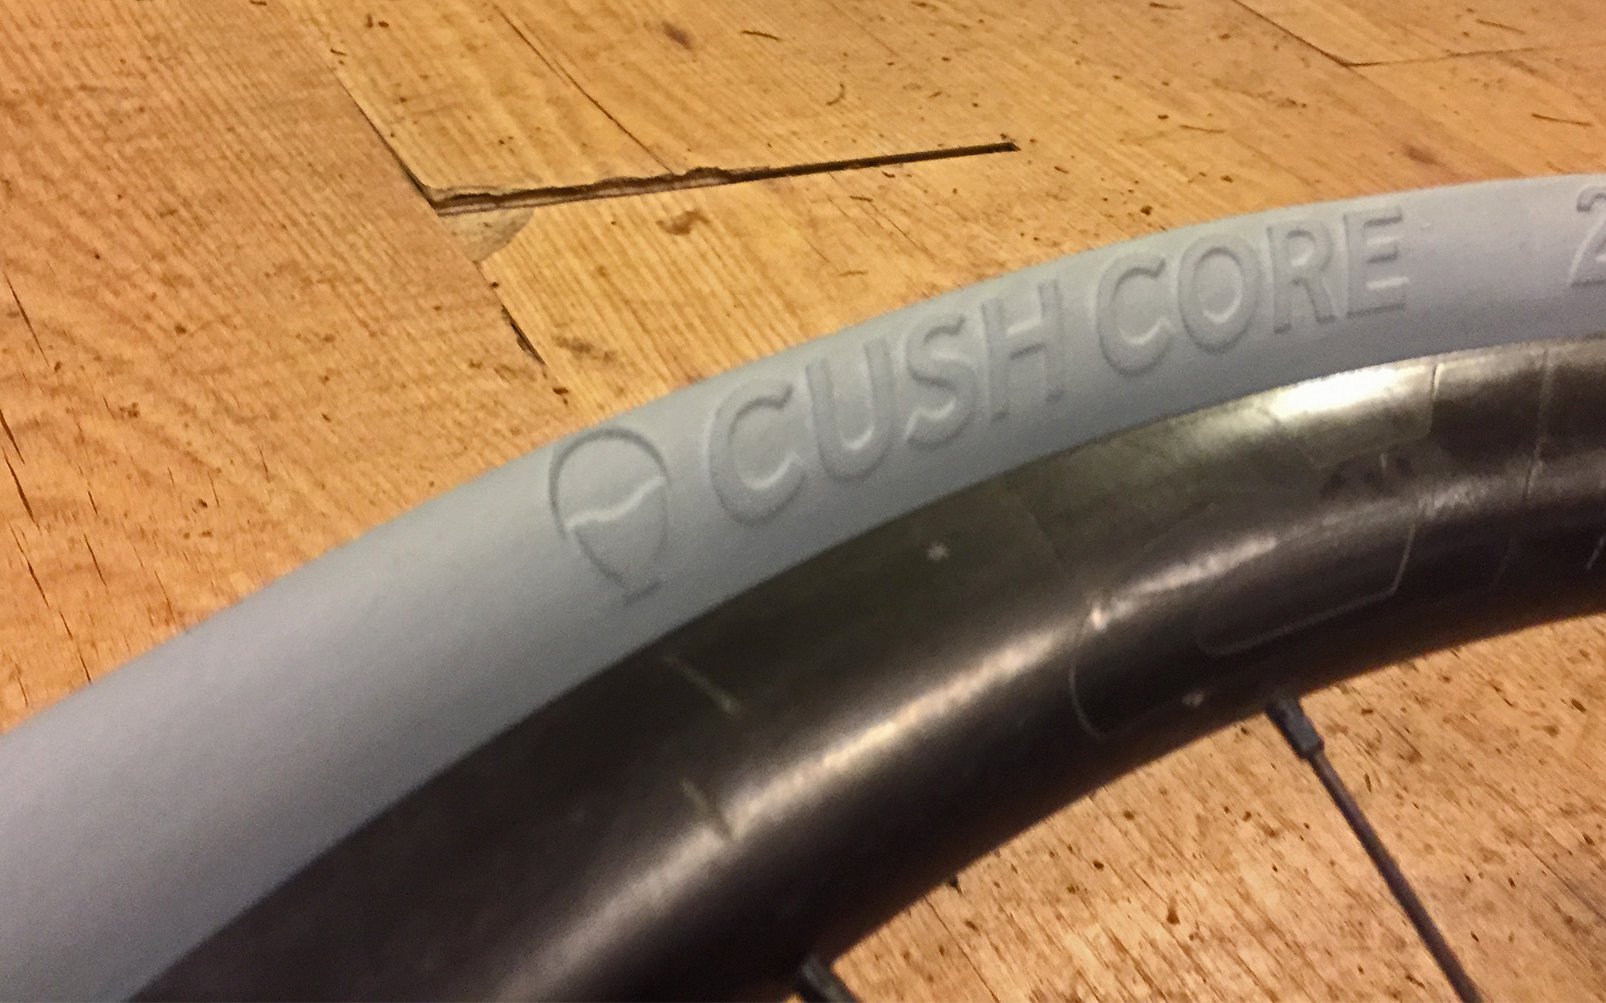 Cushcore Tire Insert Review: A Shocking Result On Gravel Roads